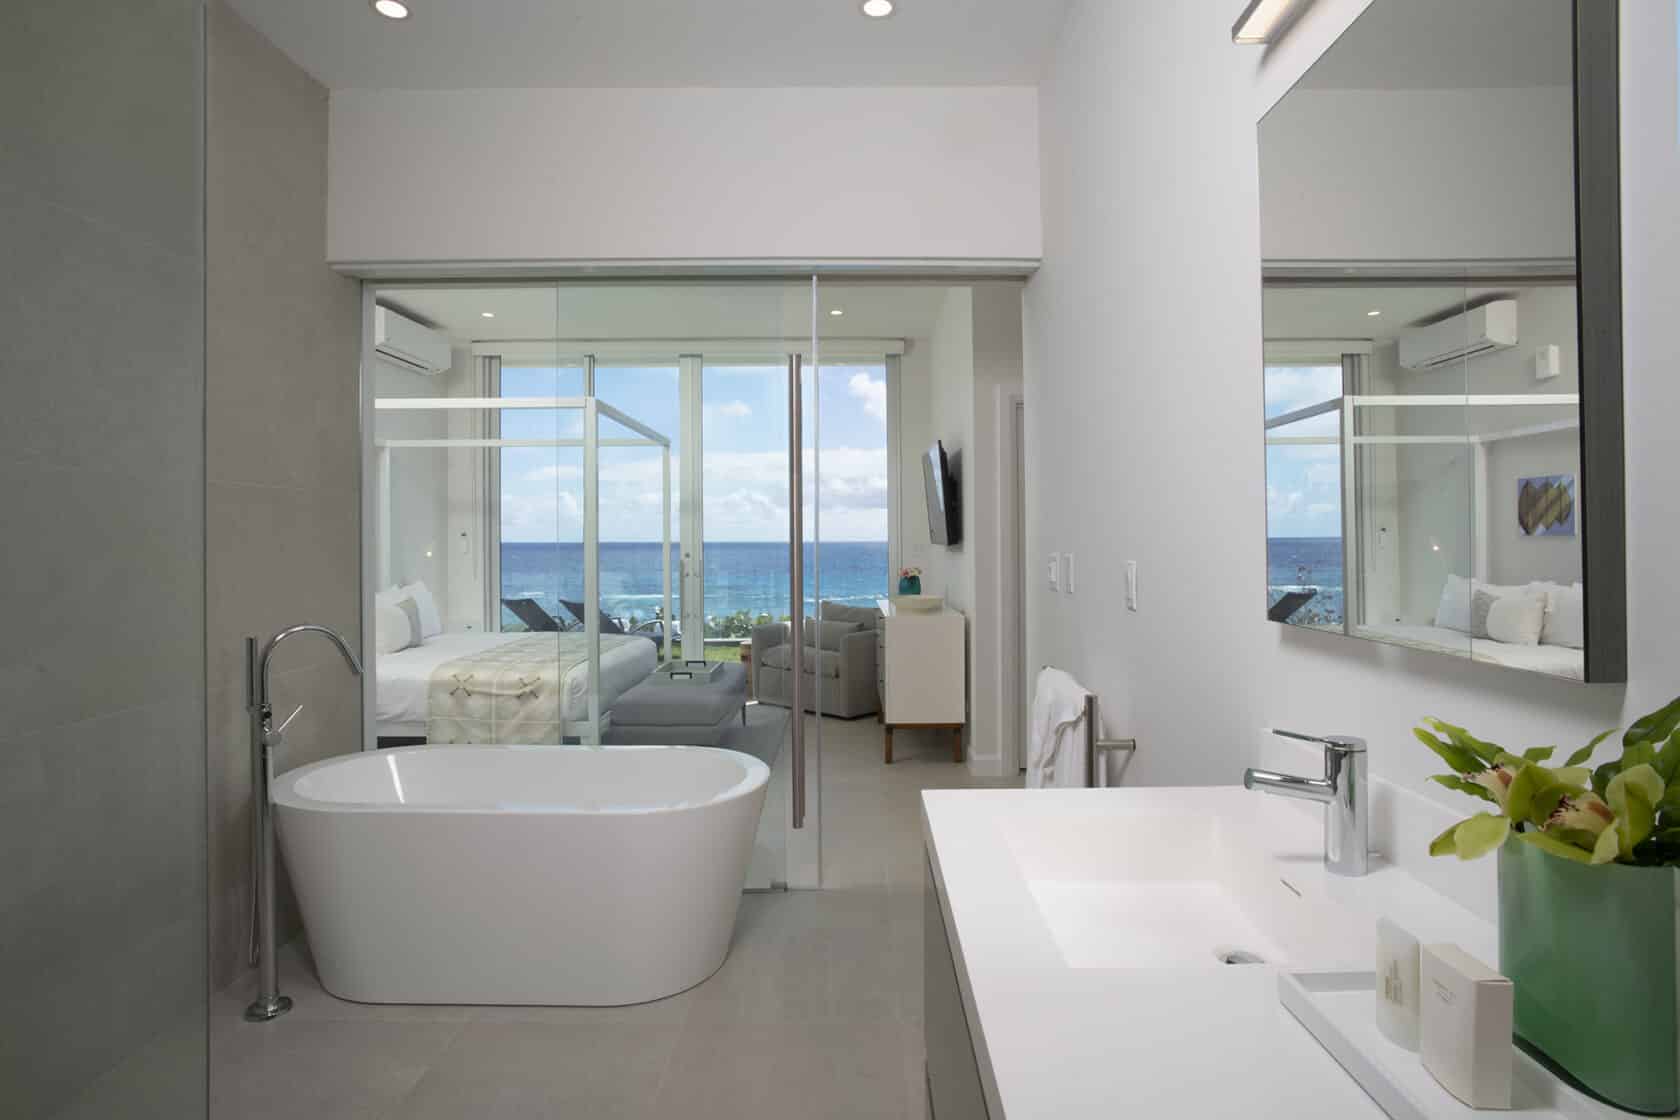 A modern bathroom with a tub and a view of the ocean in Bermuda.